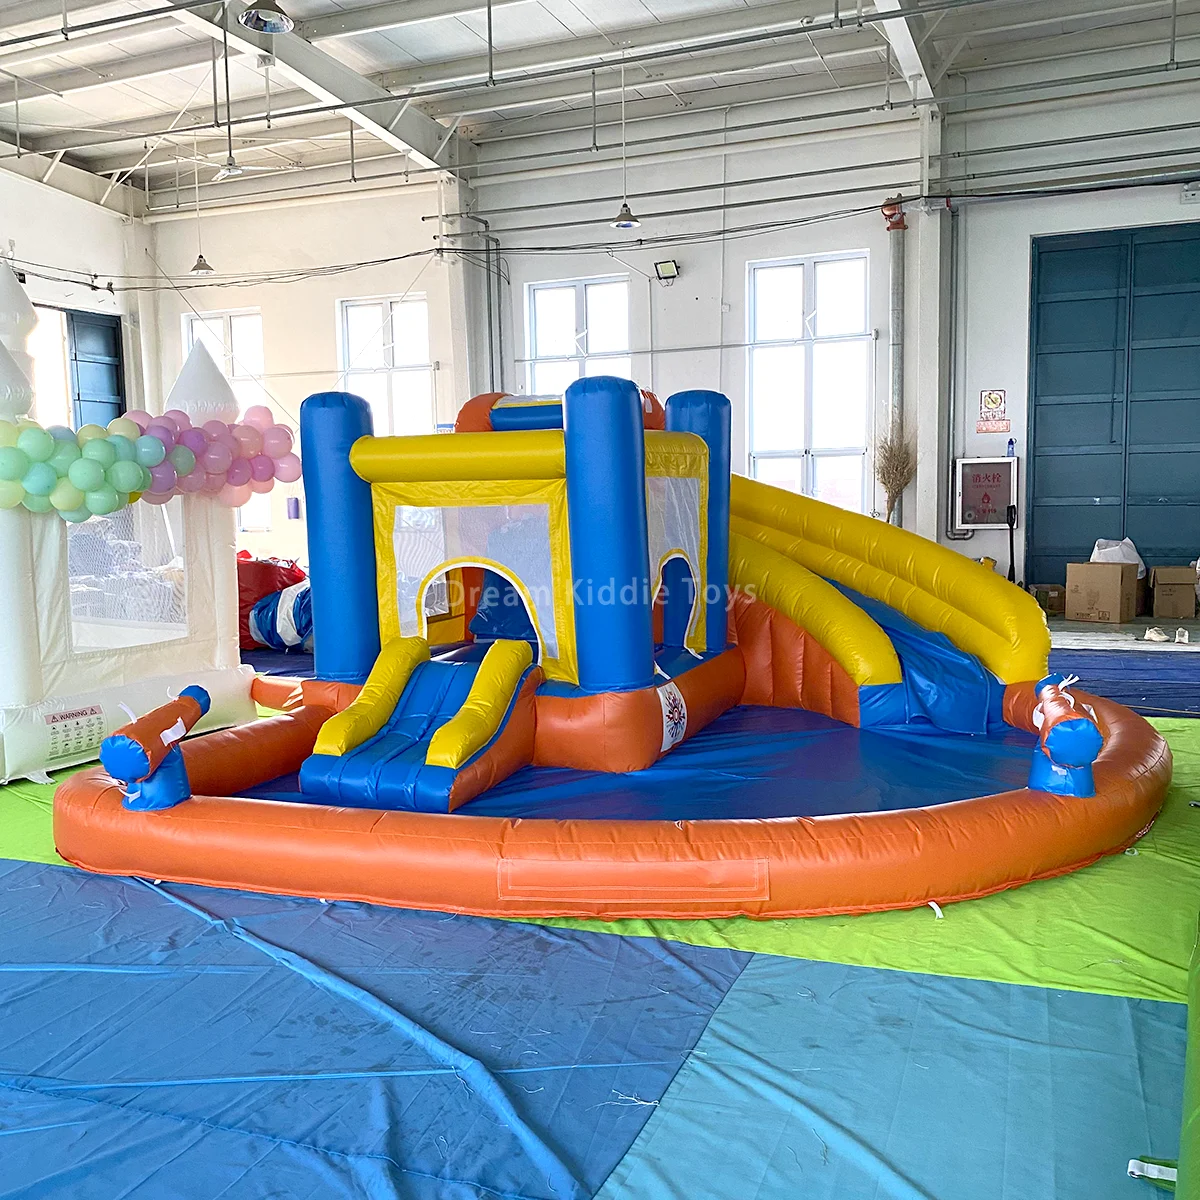 

5x4.5m commercial PVC inflatable bounce house with water pool and slide jumping castle with water slide for kids outdoor